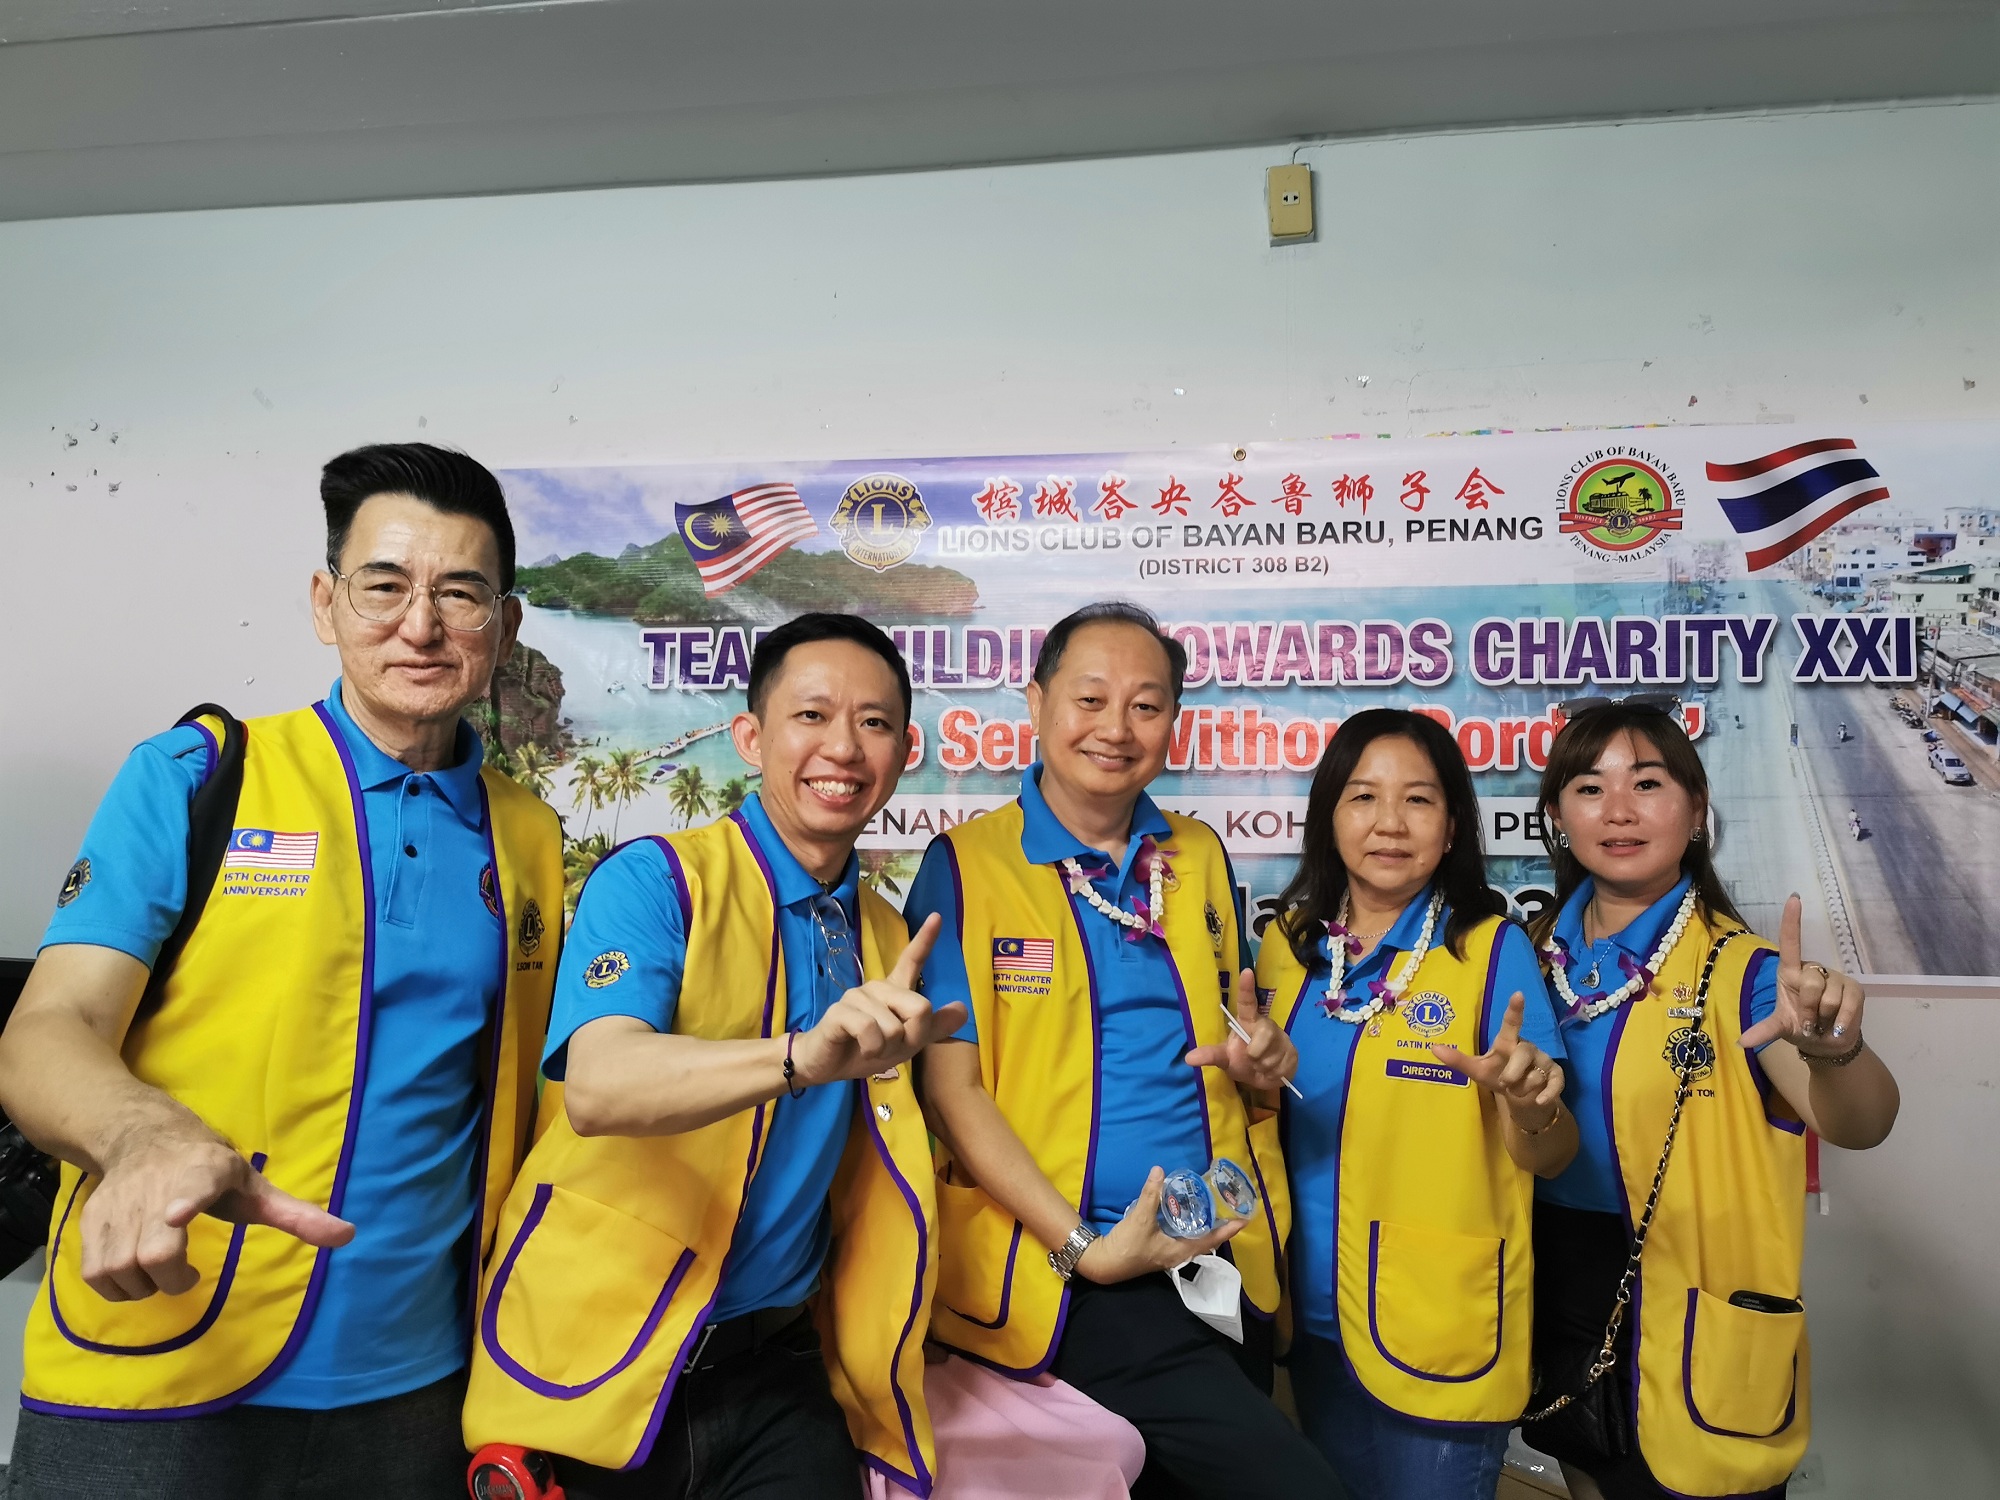 President-designate Datin Tan Kim Heong (second from the right) participated in the Southern Thailand Charity Walk, with Tu Yanhao on the right, Captain Chen Diquan from the left, Huang Yuliang and former president Dato' Li Zhongli.